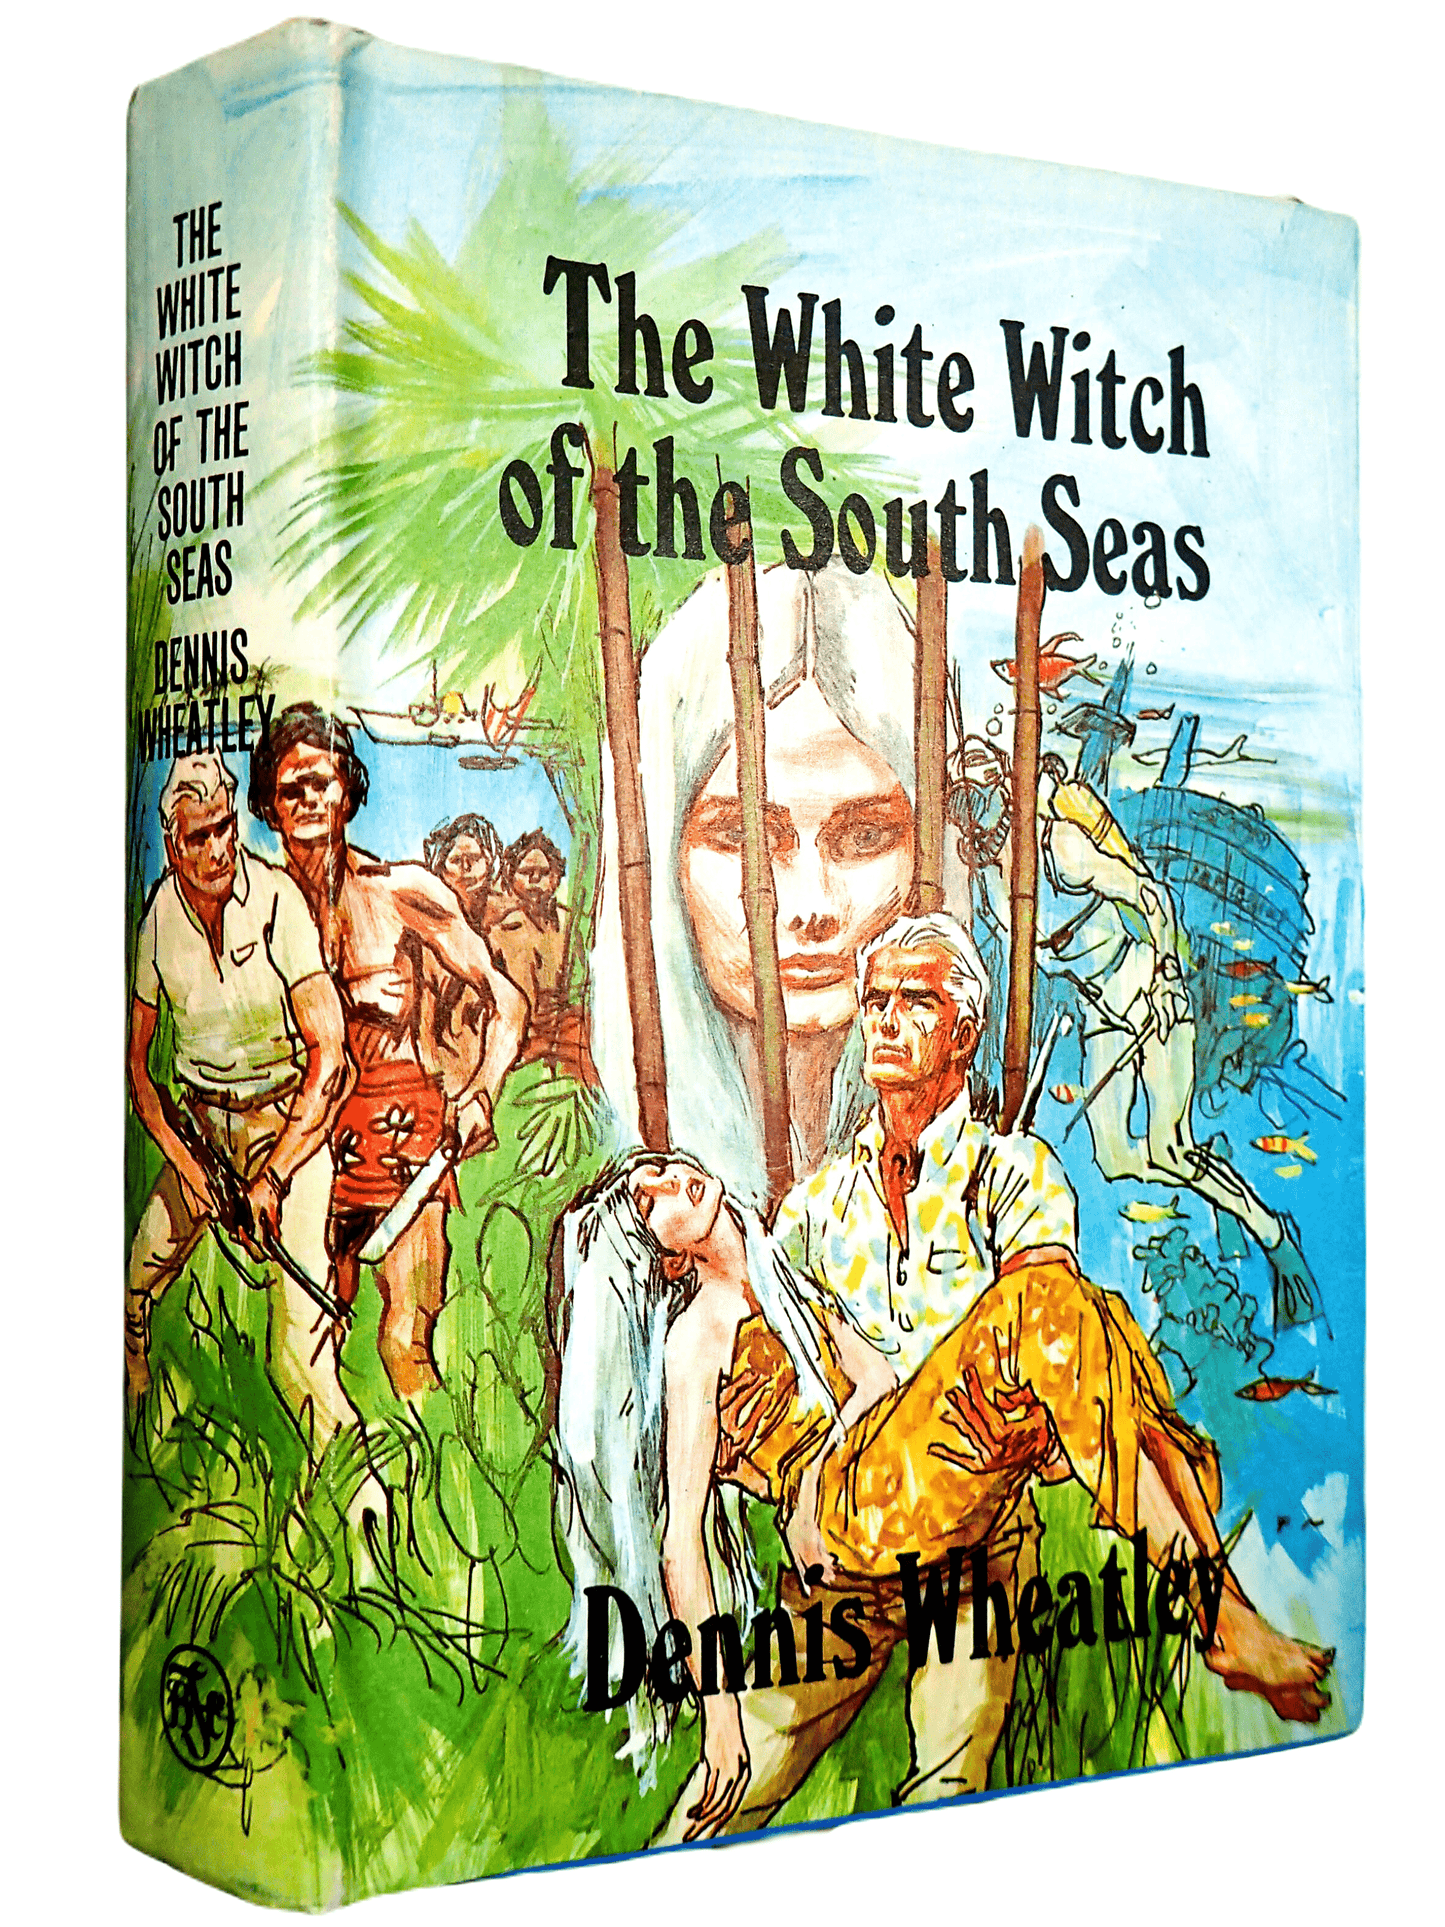 Front cover of The White Witch of the South Seas Dennis Wheatley 1960's Vintage Book First Edition Hardback BCA showing a handsome man carrying an elegant woman with long white hair. 